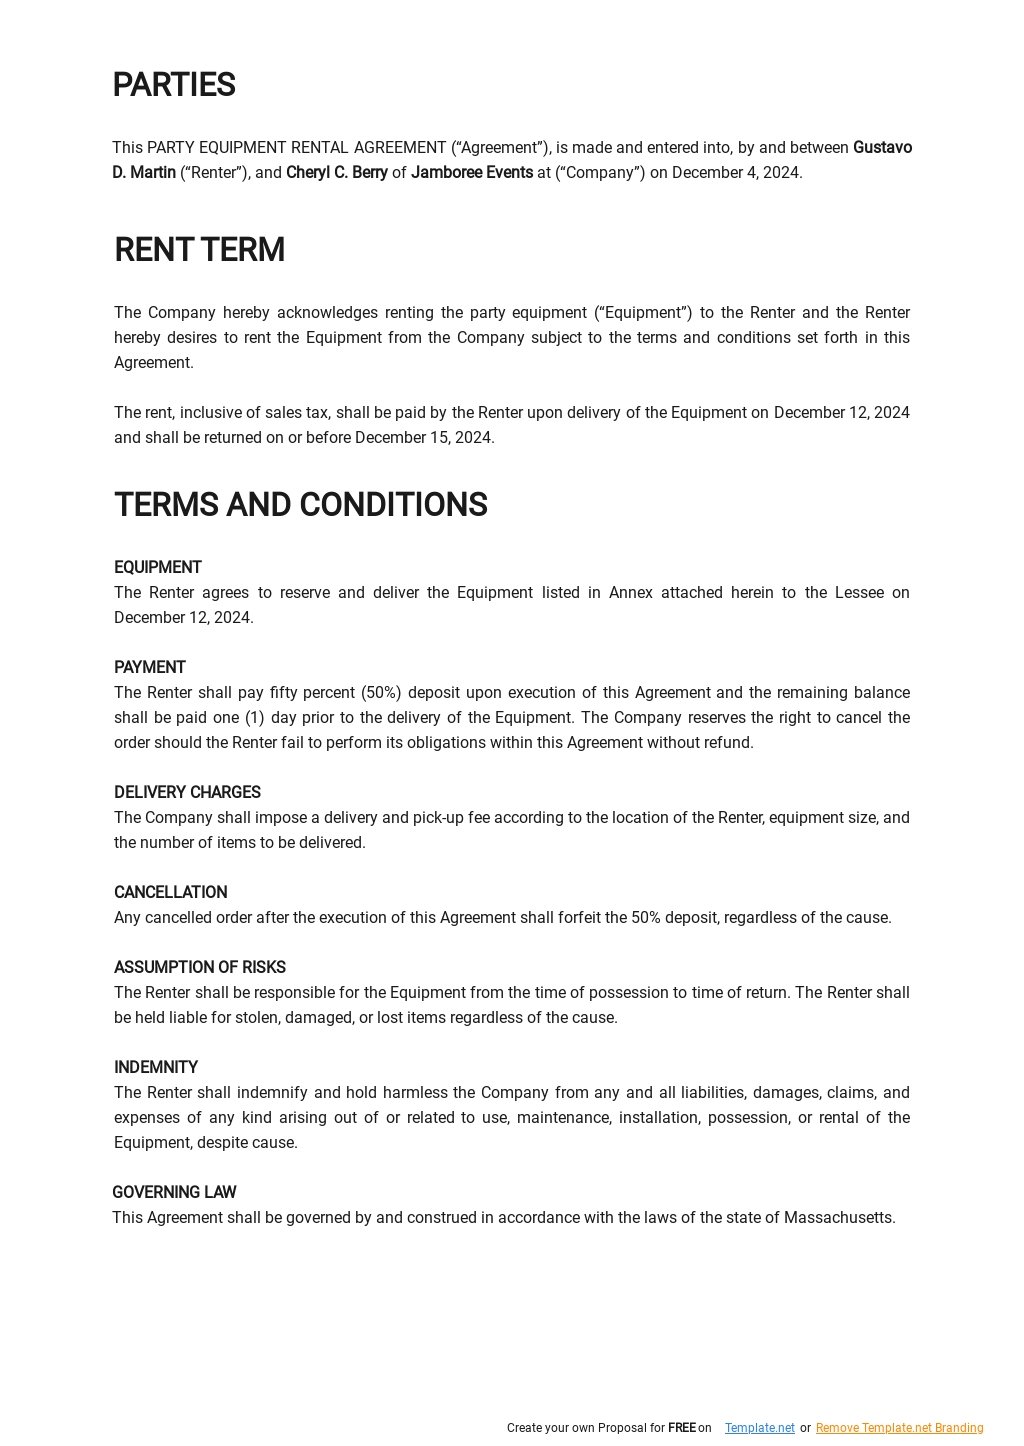 party-equipment-rental-agreement-template